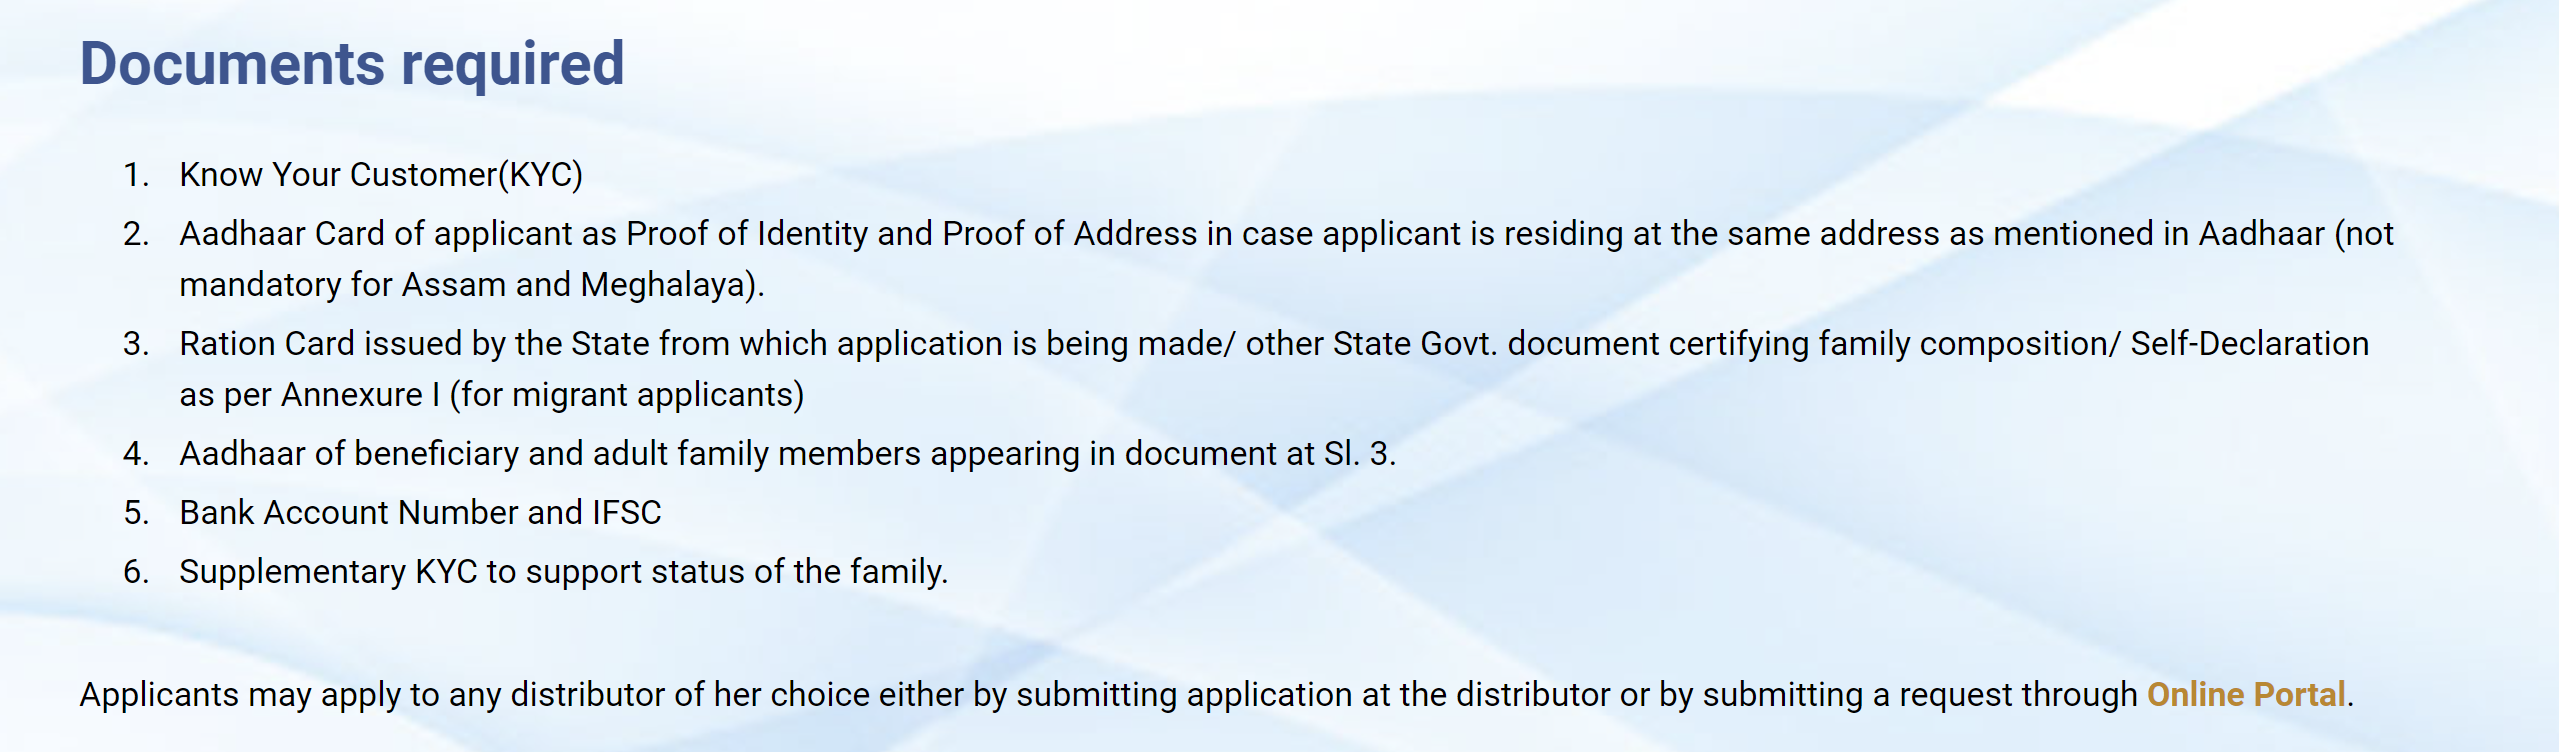 Required Documents For Ujjwala 2.0